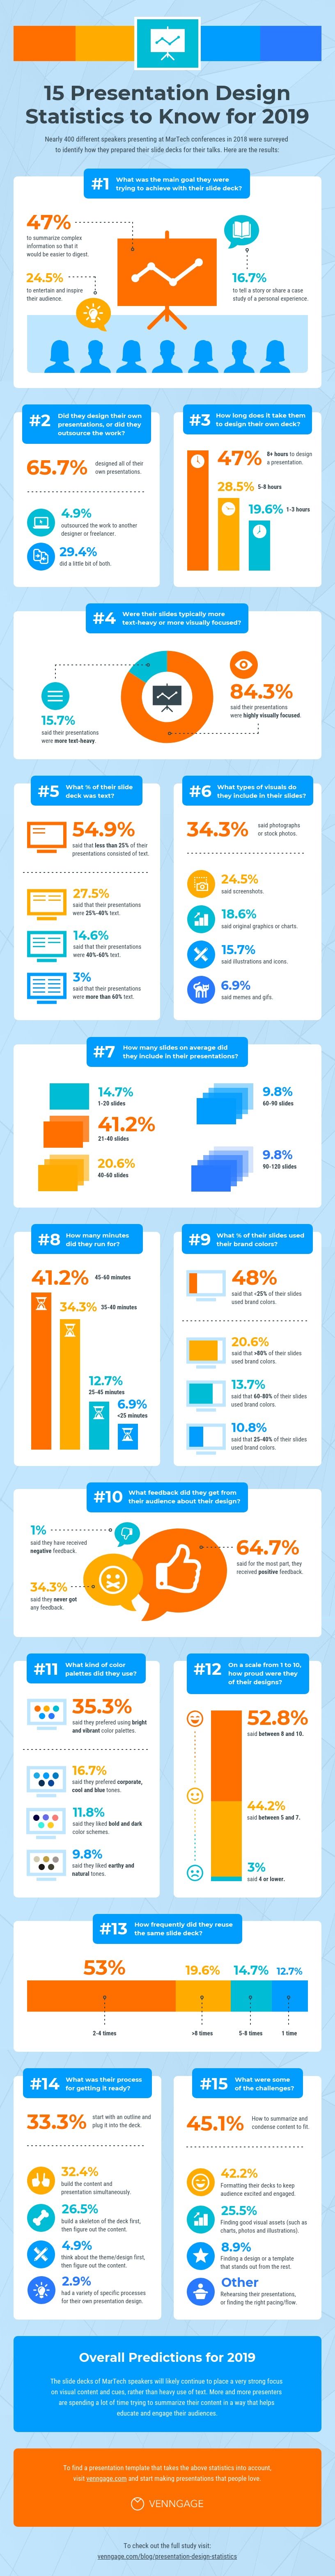 15 Presentation Design Statistics to Know For 2019 #Infographic